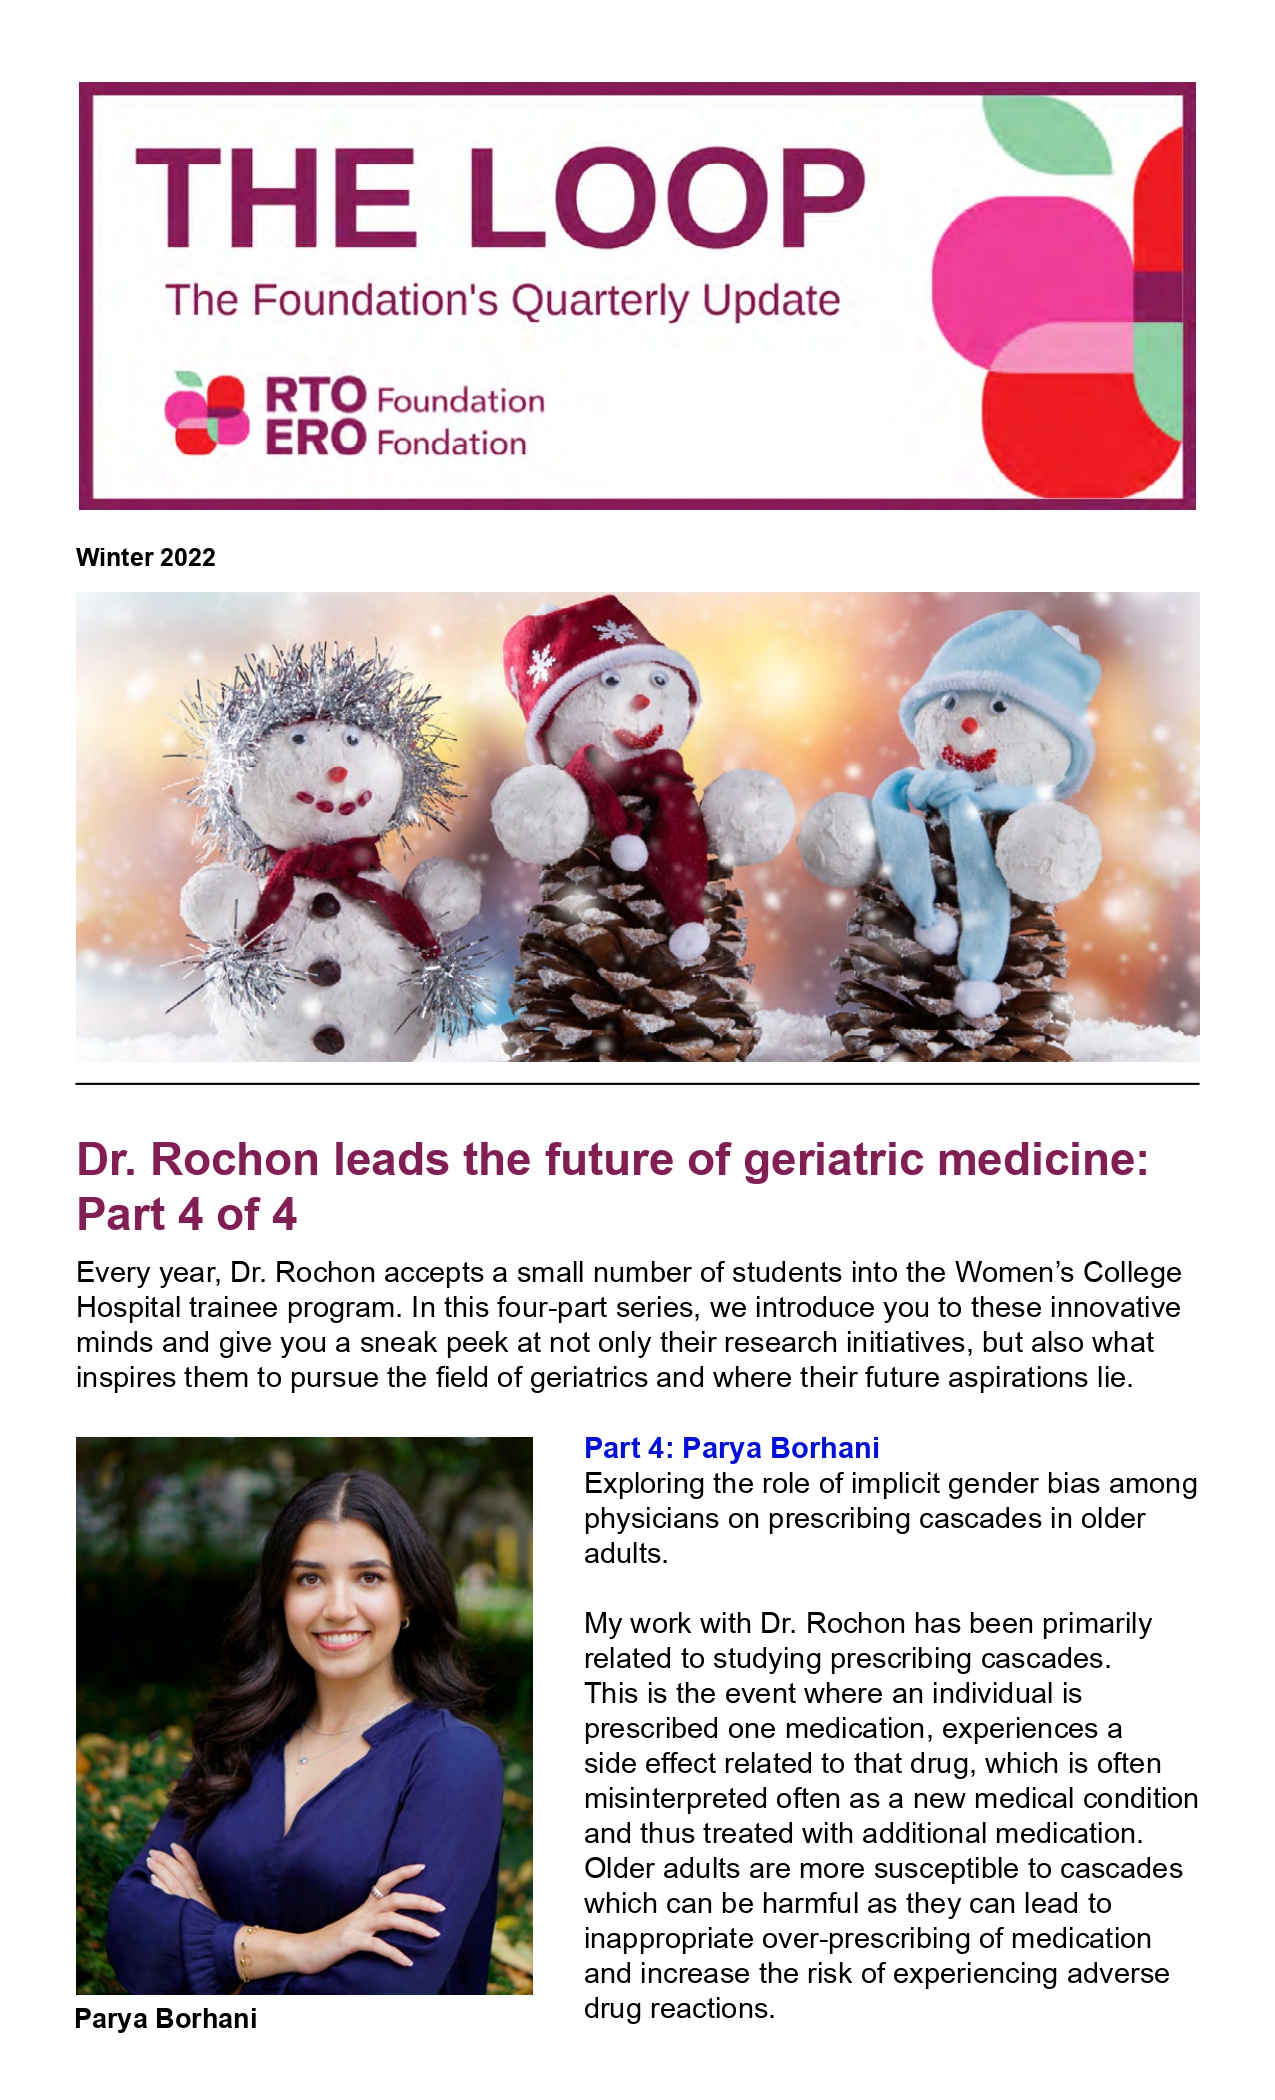 Dr. Rochon leads the future of geriatric medicine: Part 4 of 4